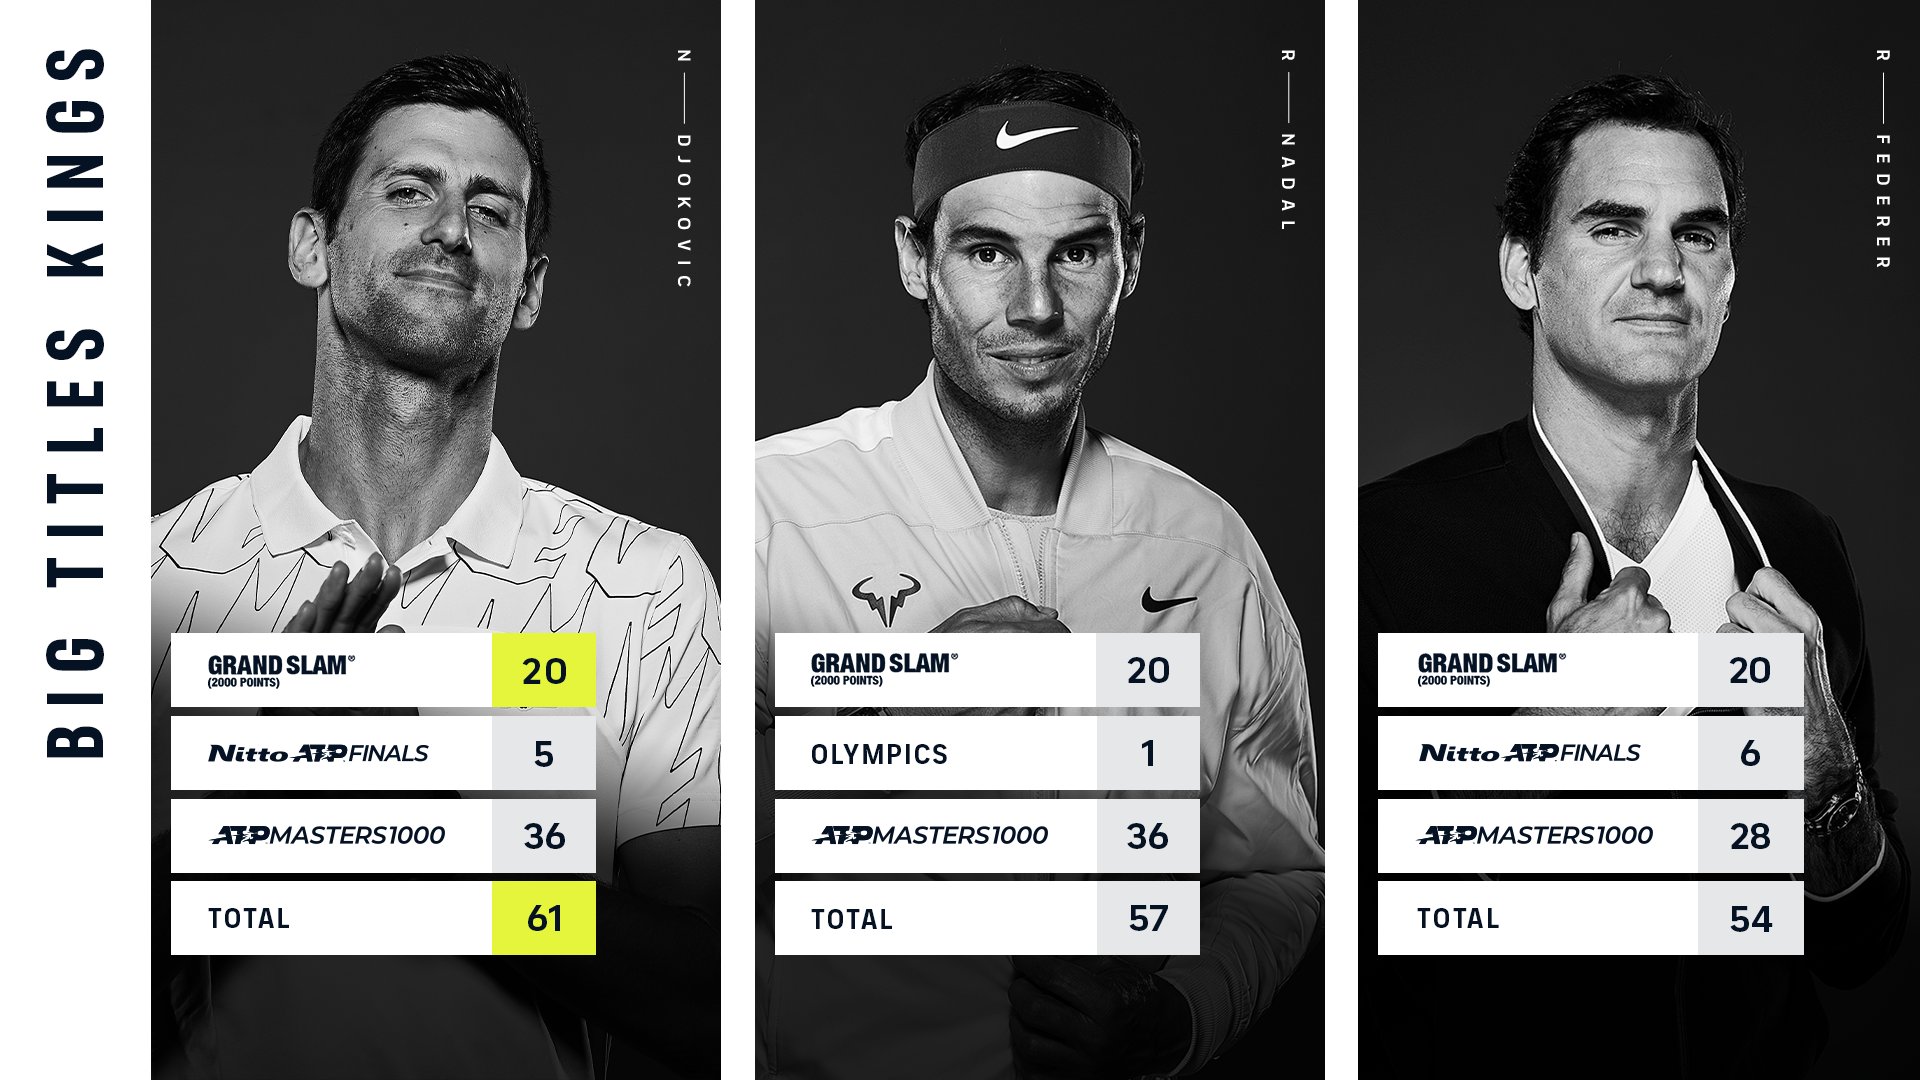 TENNIS GOAT RACE: With 20th Grand Slam & Wimbledon title under his belt, has Djokovic passed Federer & Nadal in GOAT RACE ?, Check STATS